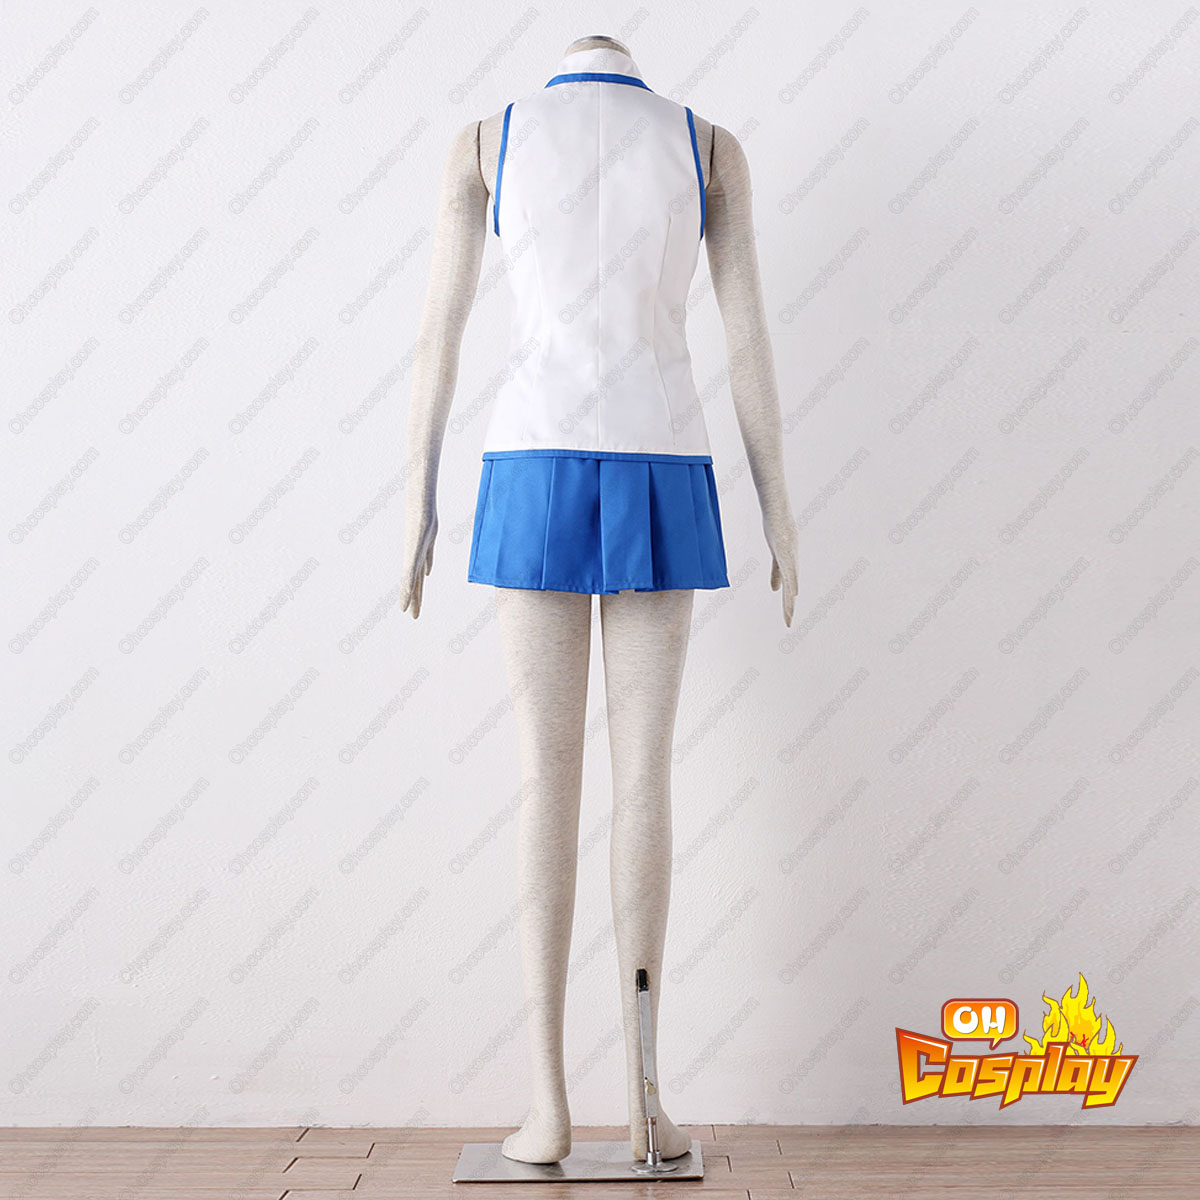 Fairy Tail Lucy 1ST Cosplay Costumes Deluxe Edition [B184]